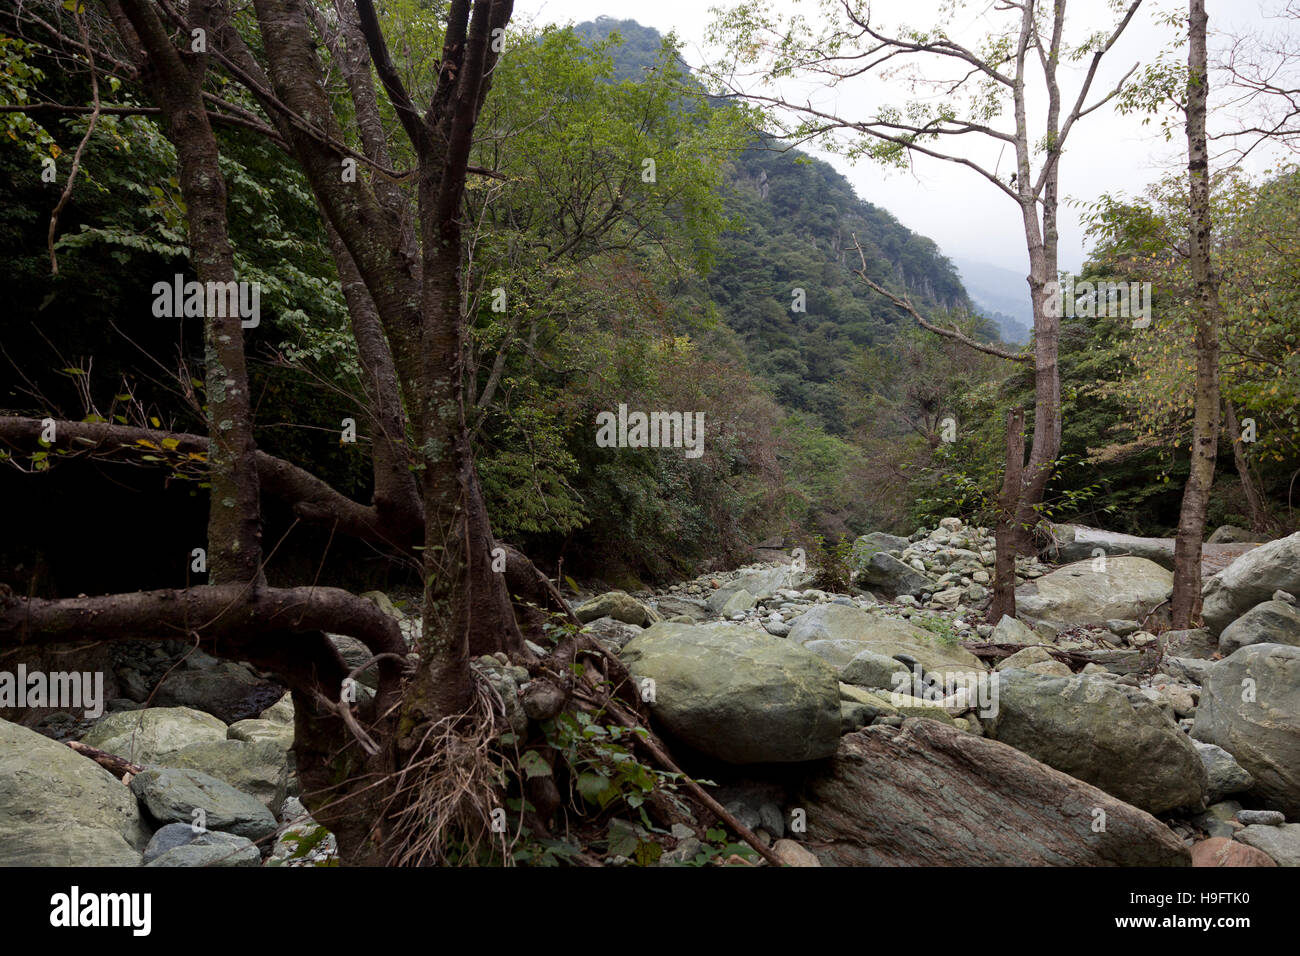 The river in the upper reaches of the valley at Bai Shui Jiang almost dries out in the dry wintery season. Stock Photo